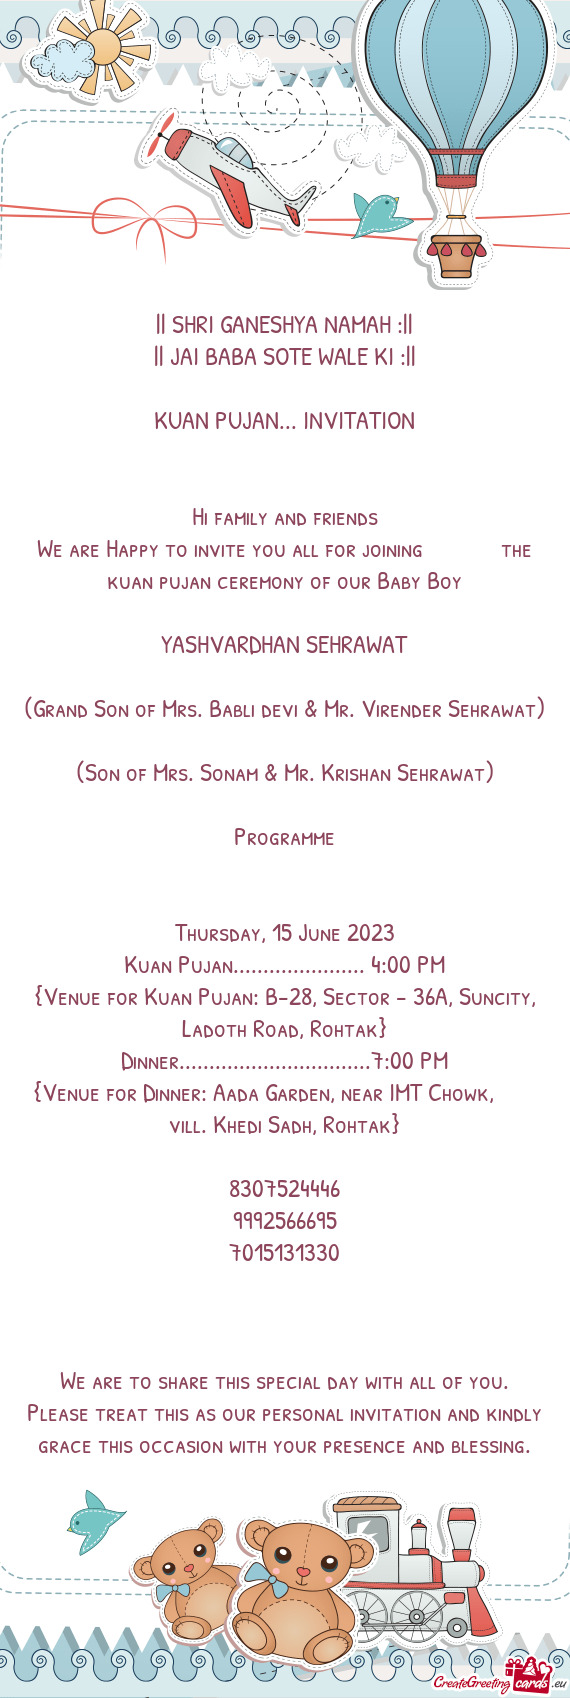 We are Happy to invite you all for joining    the kuan pujan ceremony of our Baby Boy